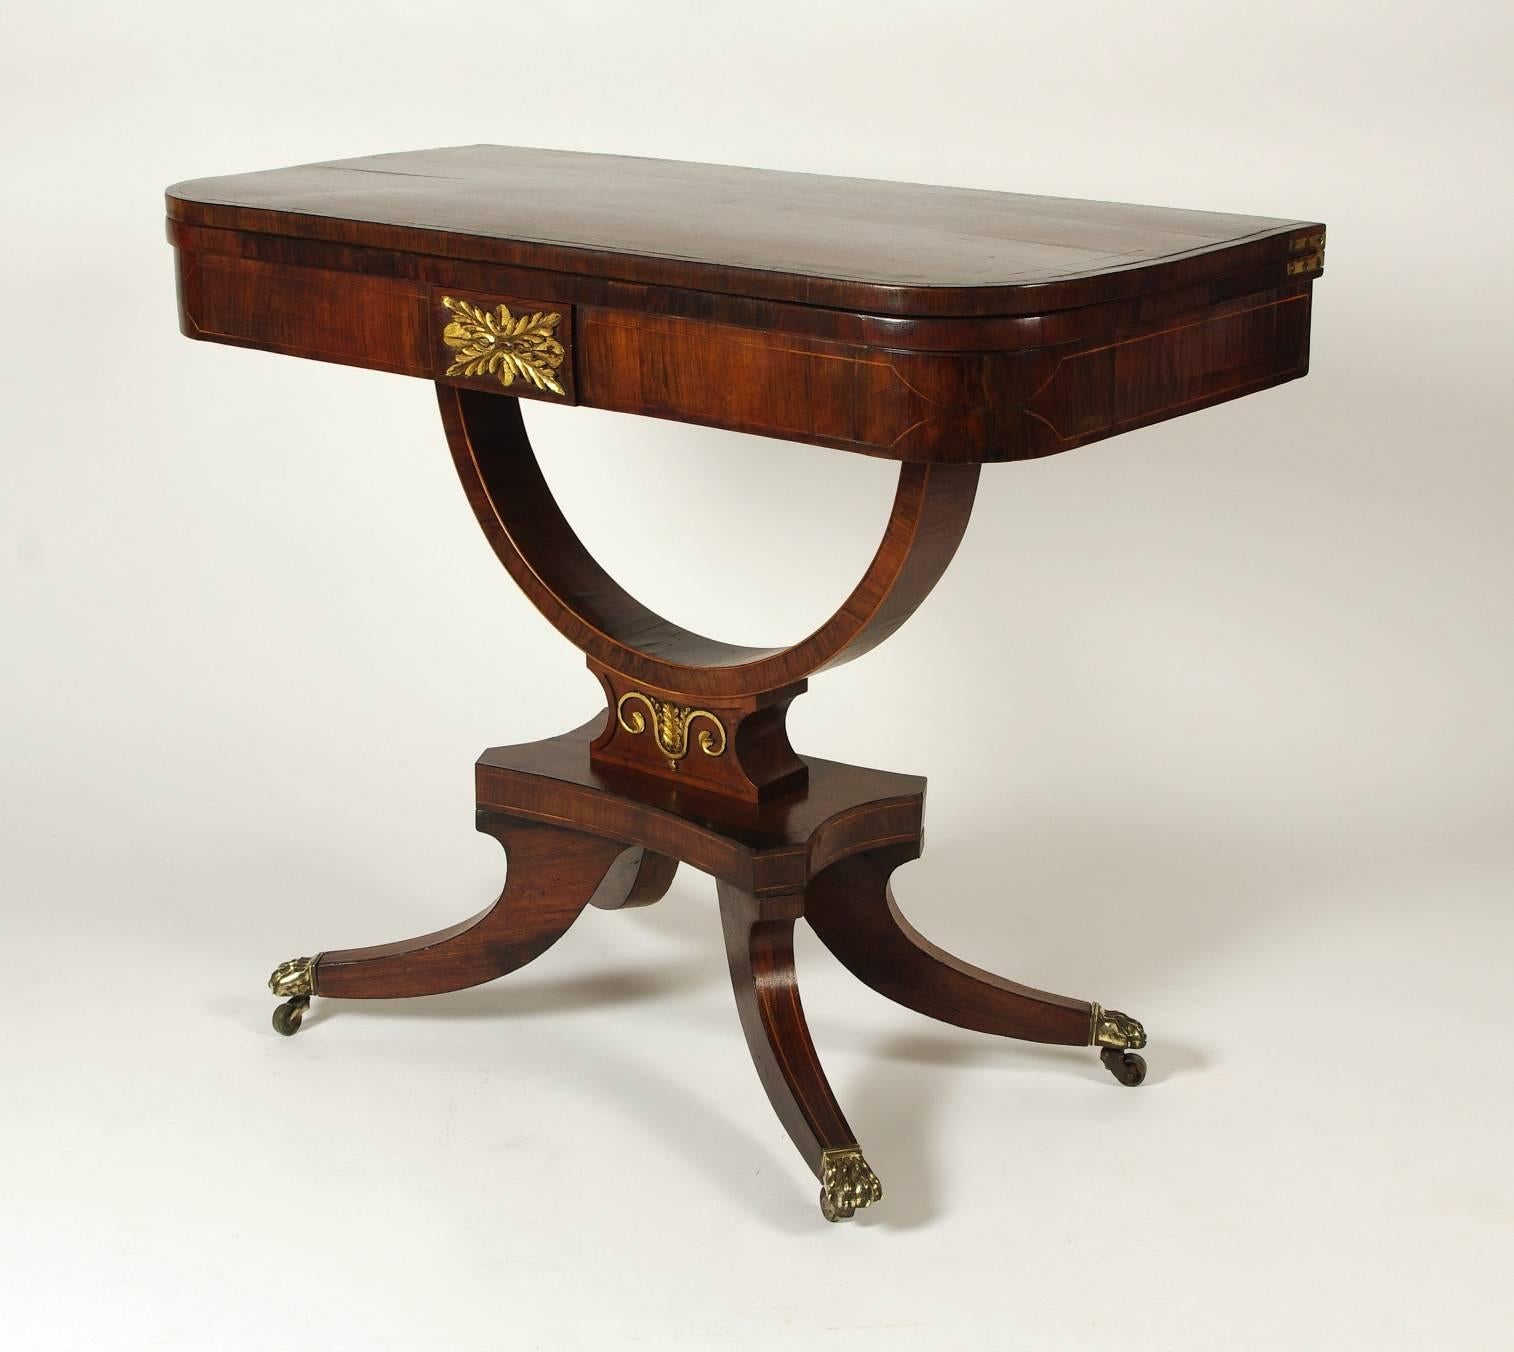 Regency rosewood fold over card table, the rectangular top with rare palm-wood crossbanding opening to a replaced tooled black leather interior; the apron with string inlay centered by a leaf carved and gilded medallion on a stylish arched support